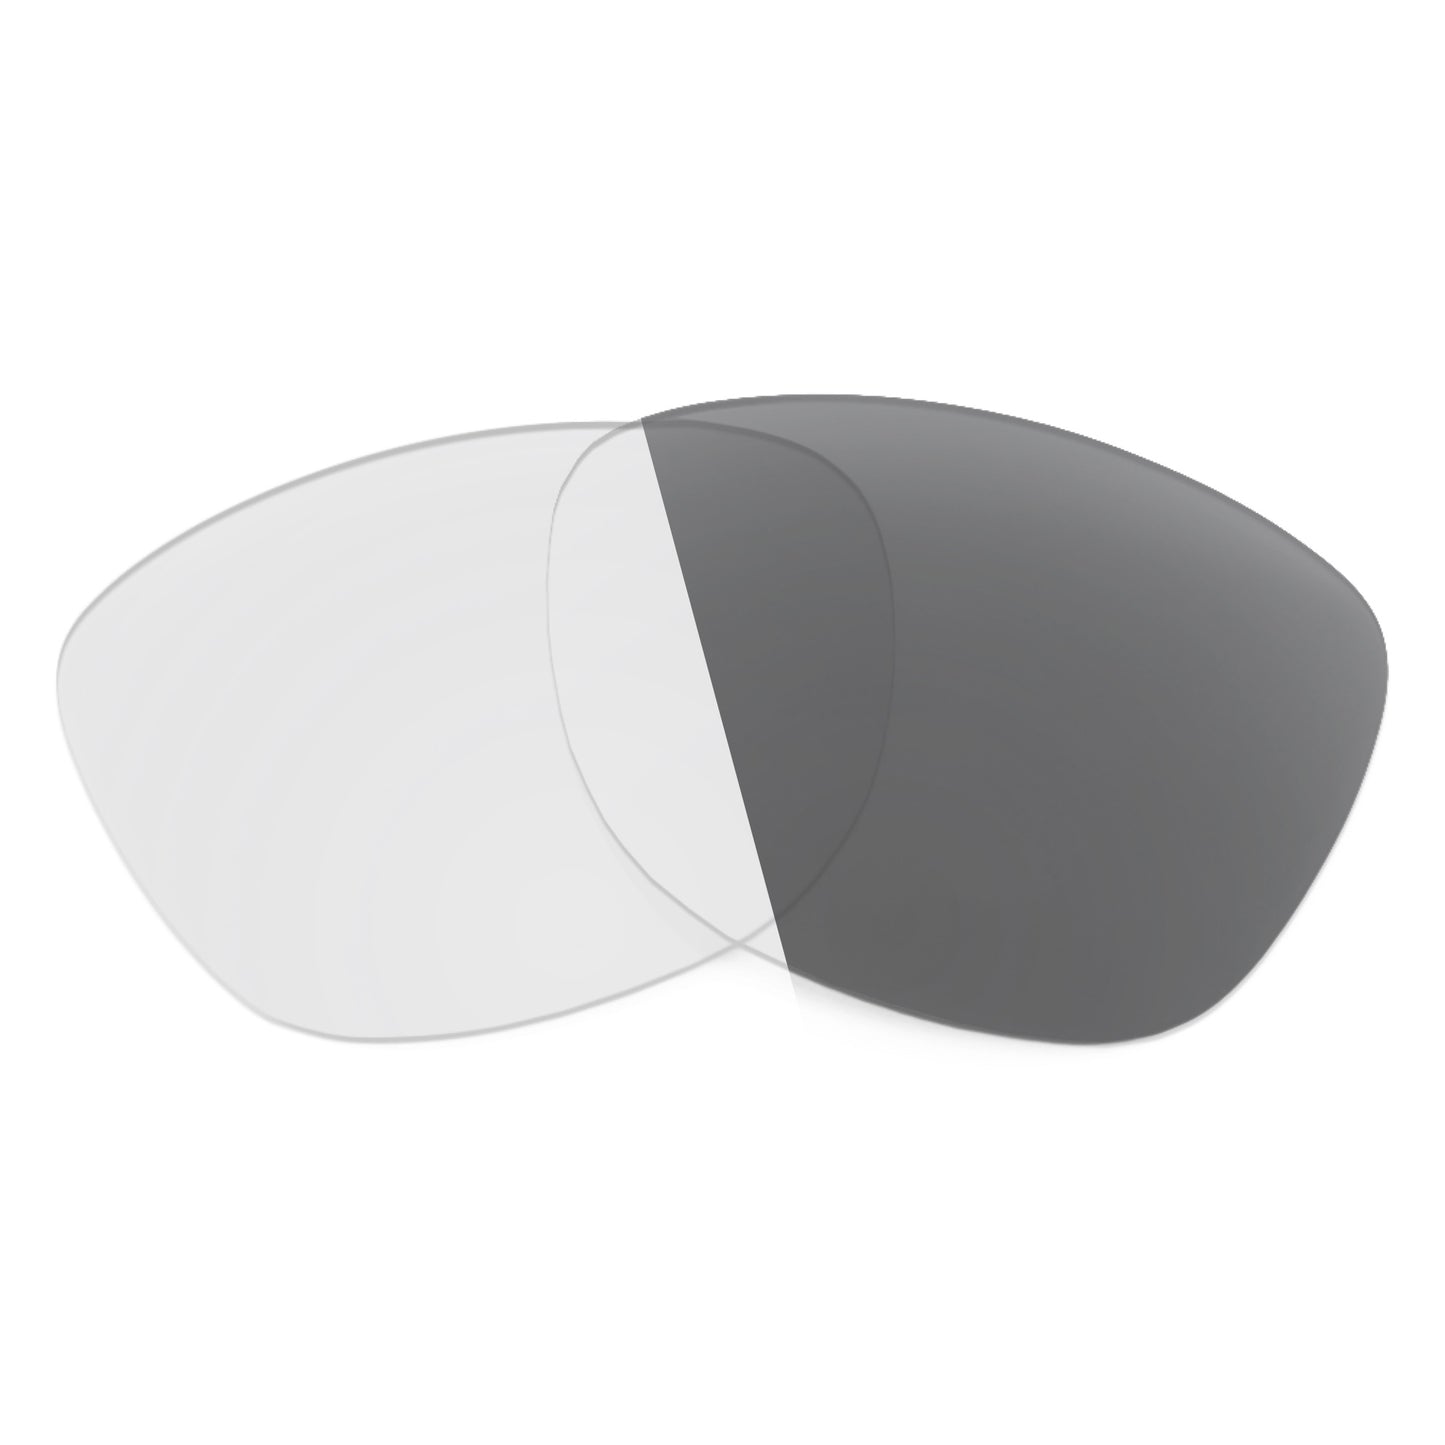 Revant replacement lenses for Oakley Disguise Non-Polarized Adapt Gray Photochromic